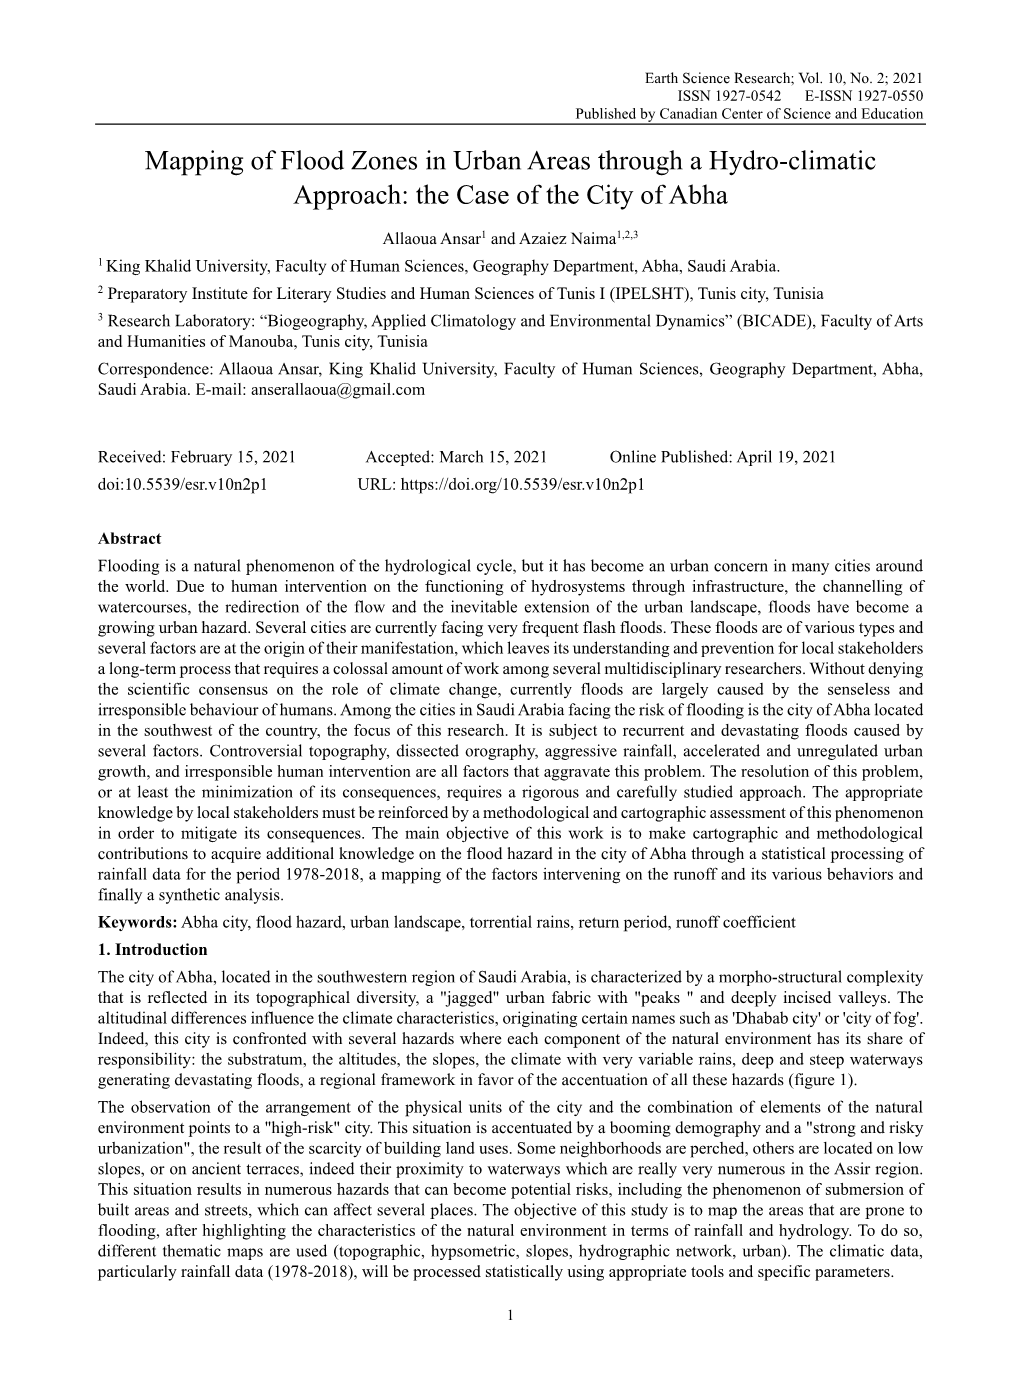 Mapping of Flood Zones in Urban Areas Through a Hydro-Climatic Approach: the Case of the City of Abha